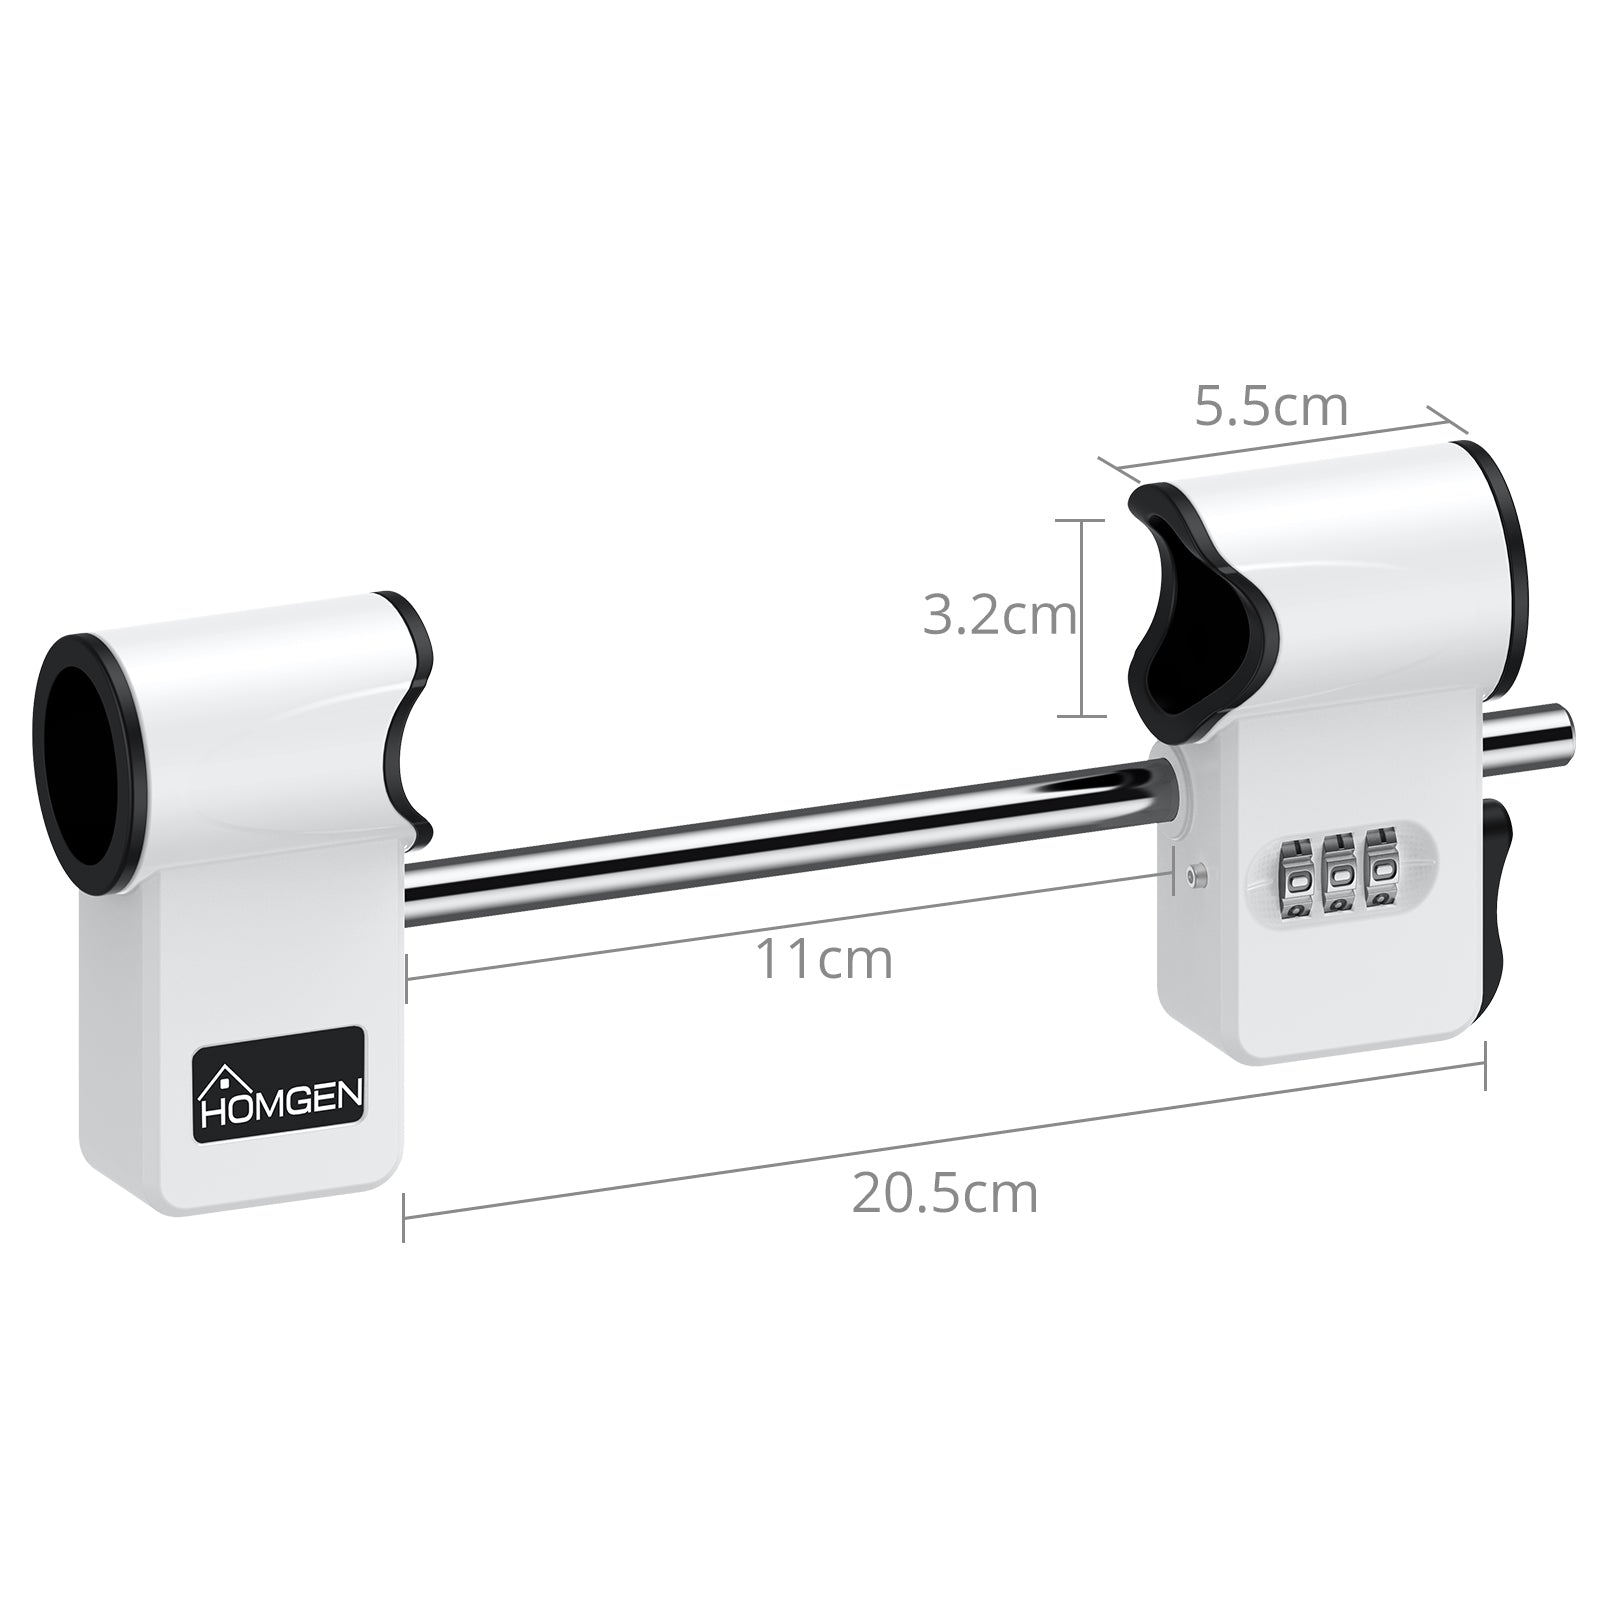 Sihnman Patio French Door Lock Hardware for Patio Door Lock Security and Double Door Security Reinforcement. Combination Padl